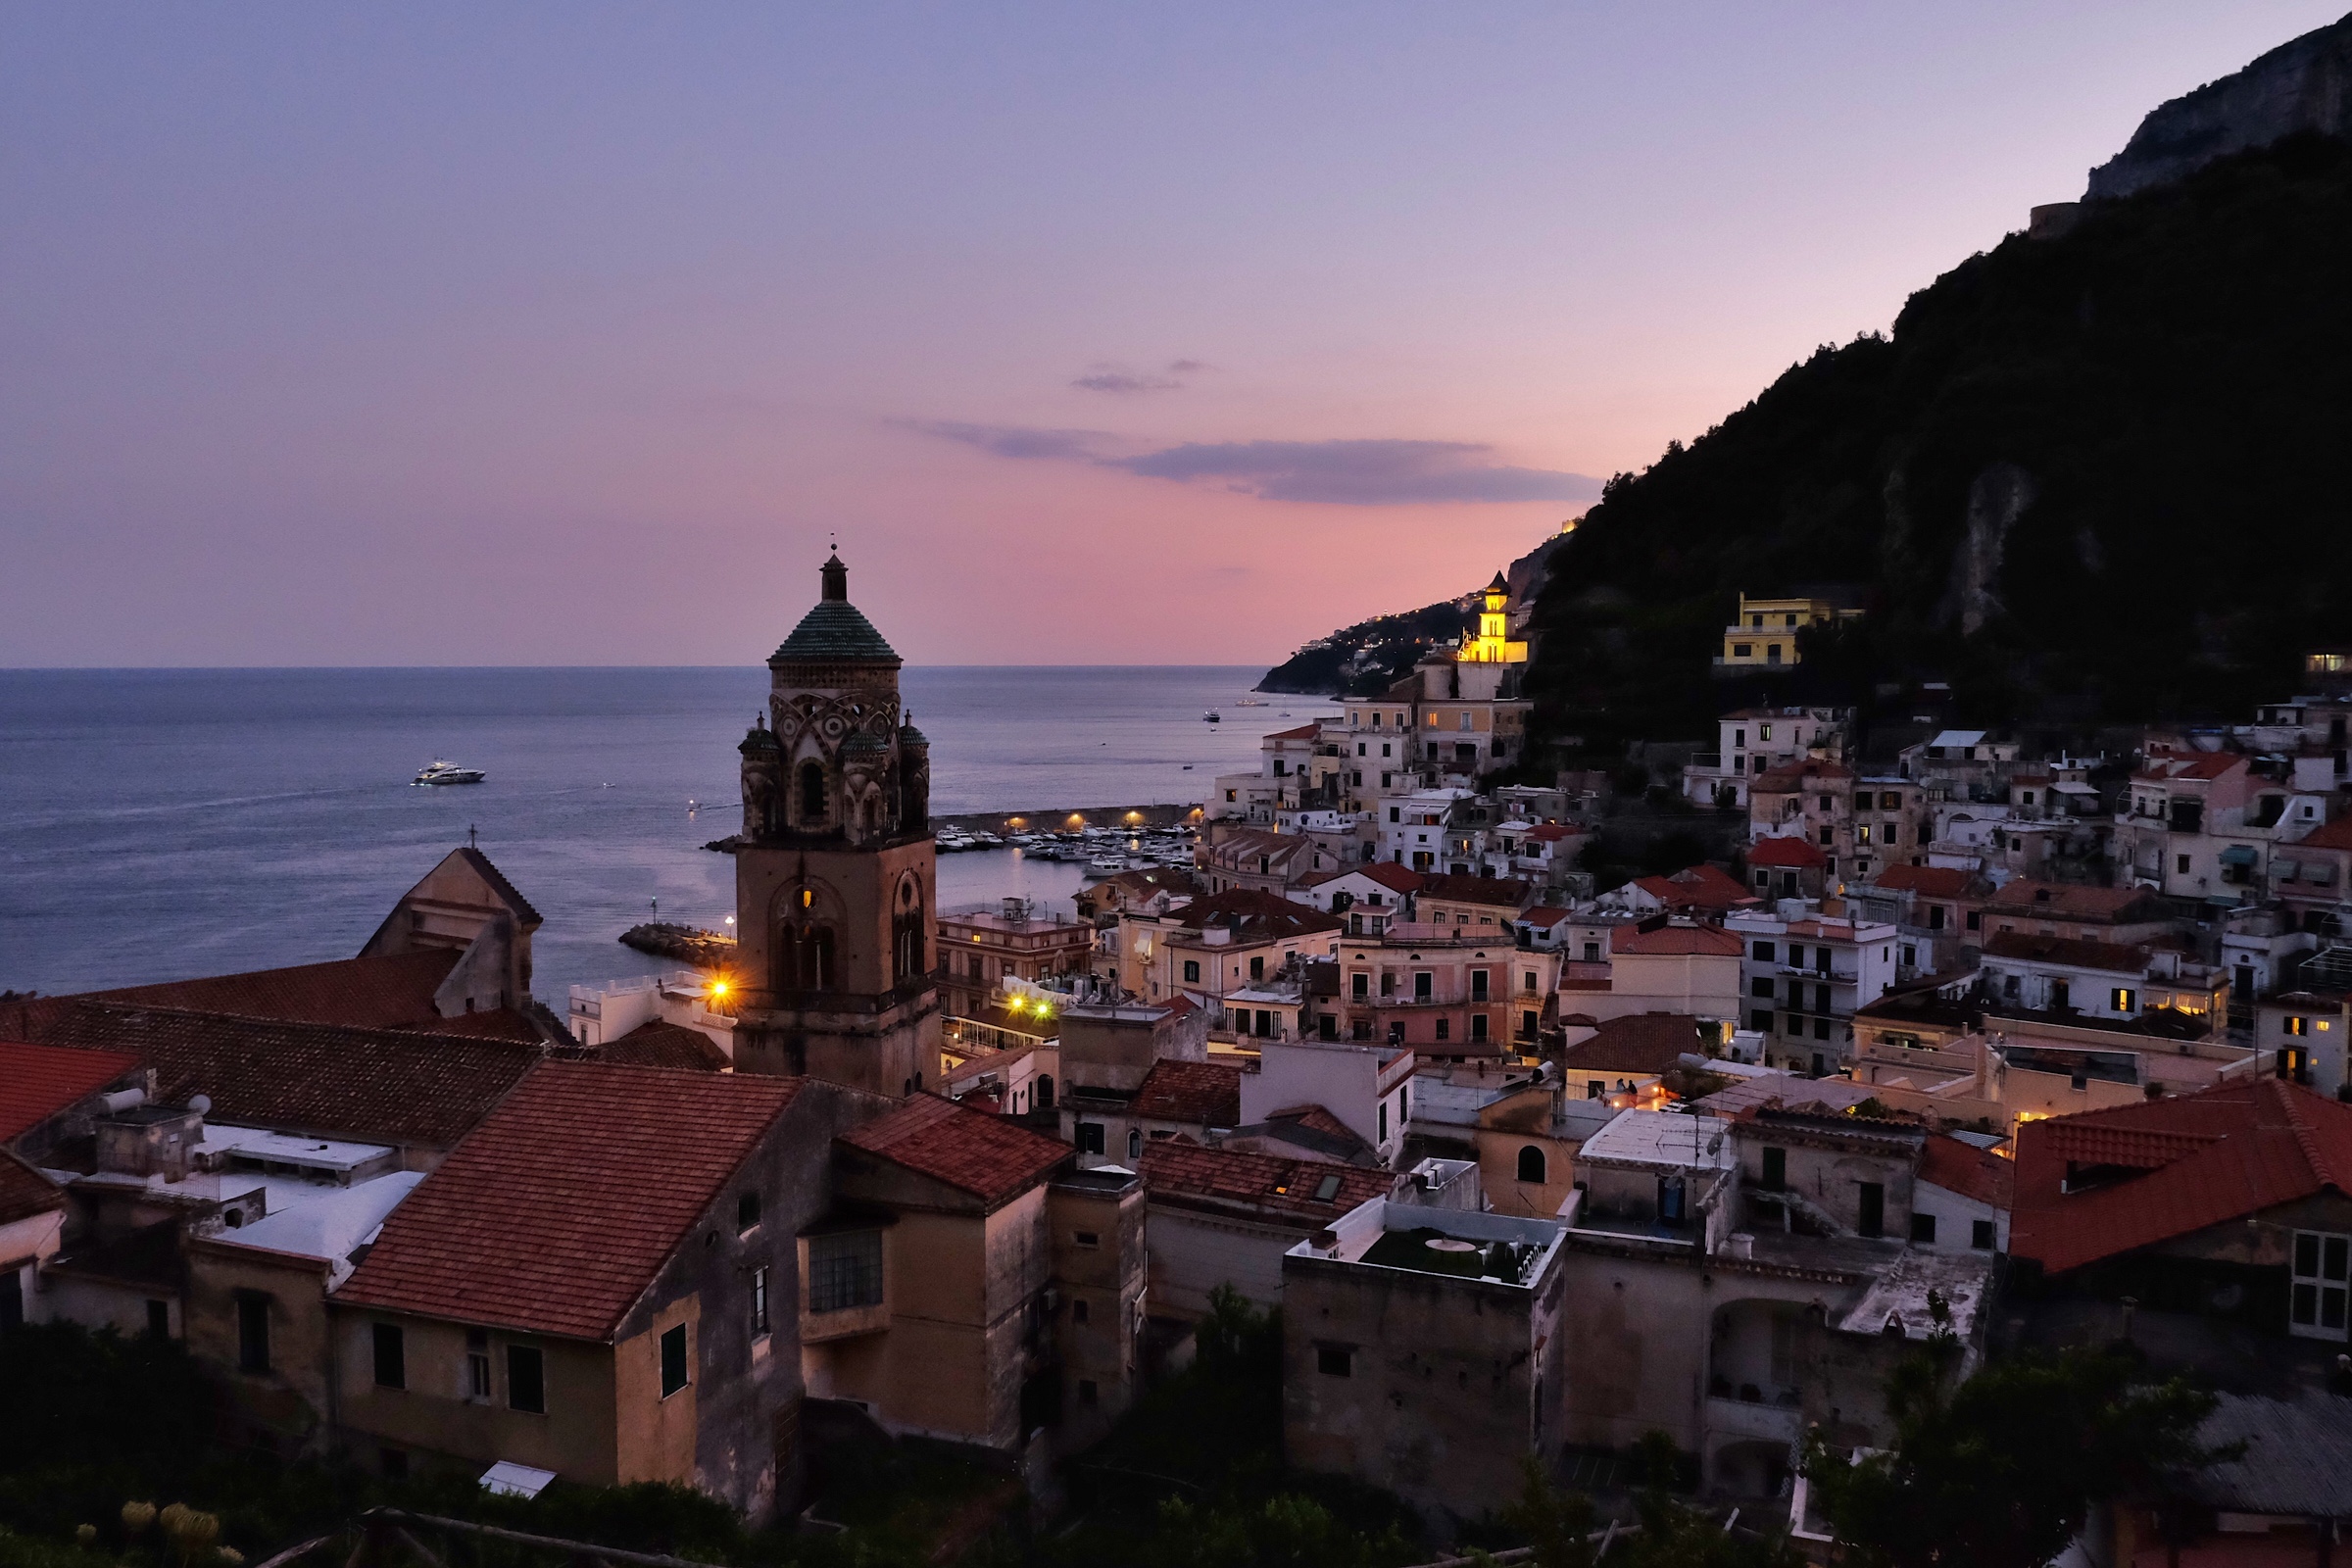 Dusk view from our apartment in Amalfi.